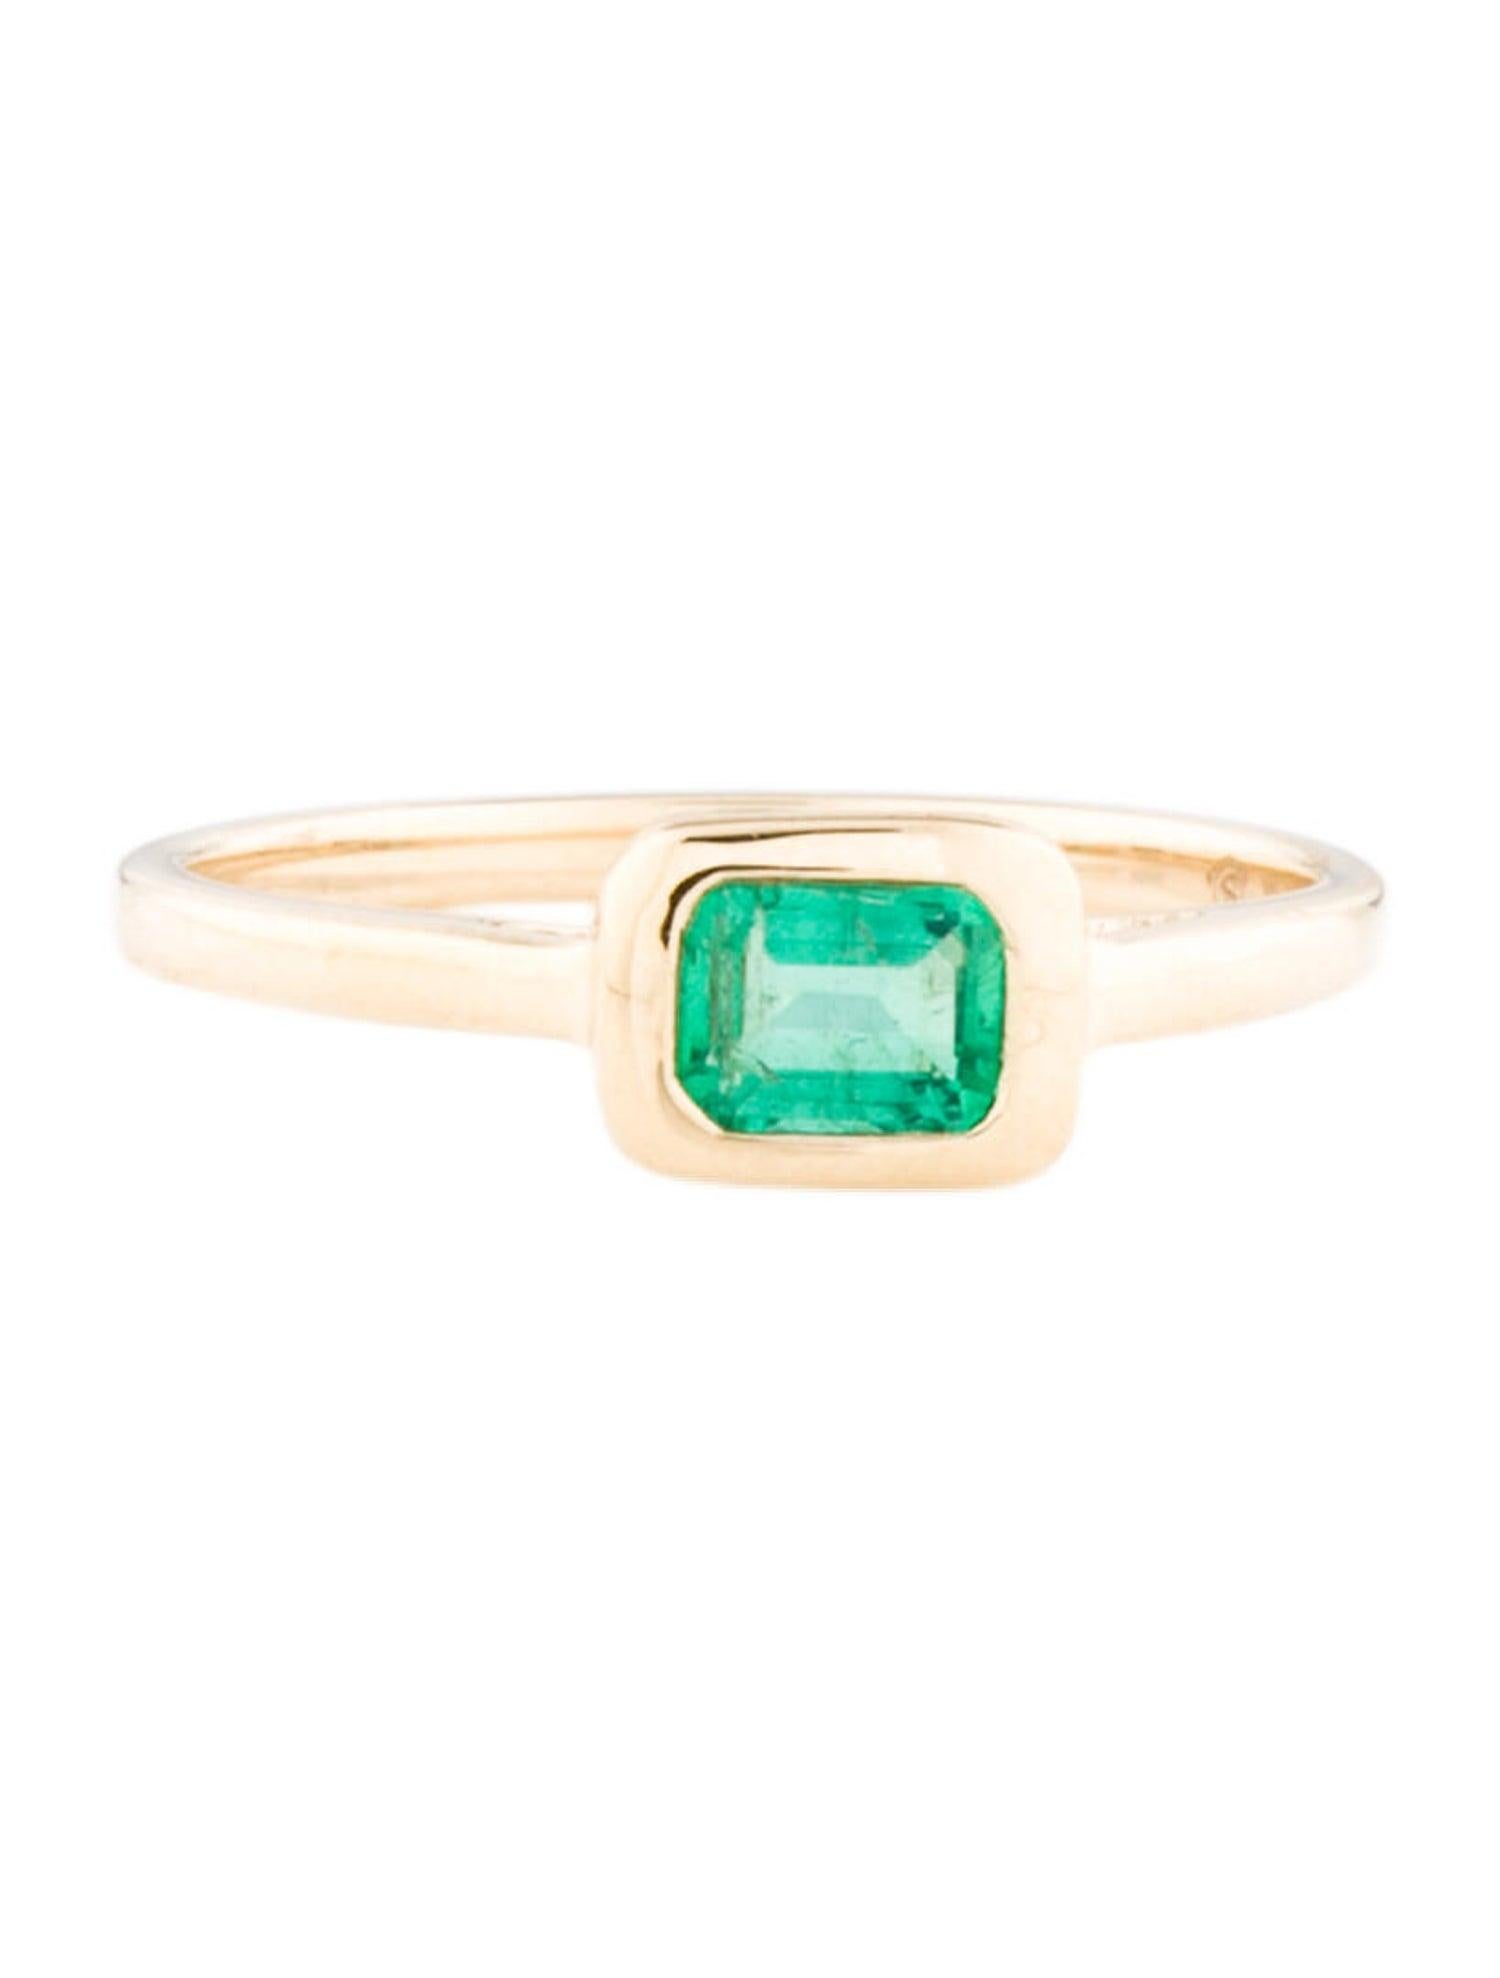 14k Yellow Gold & Emerald-Cut Green Emerald Ring 0.60 CTTW For Sale 2